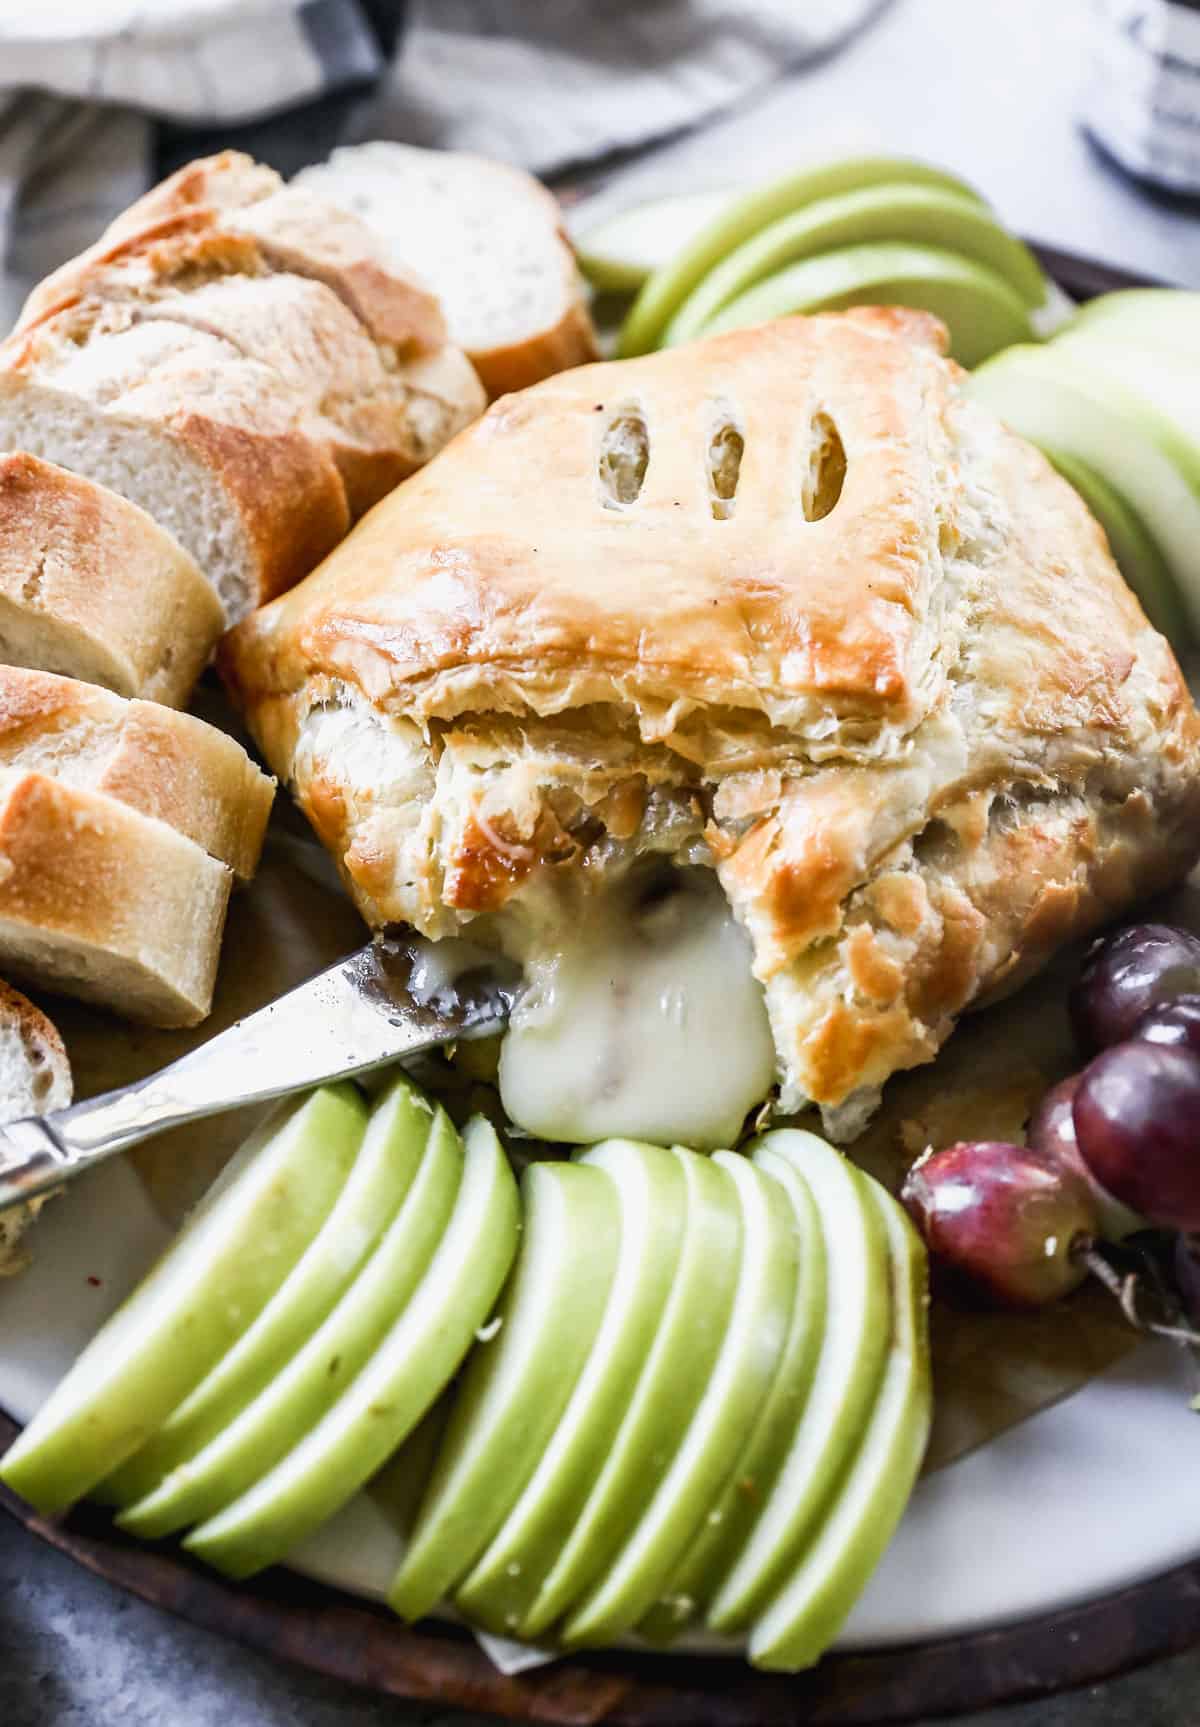 A close-up image of Baked Brie wrapped in puff pastry with some of the melted cheese coming out.